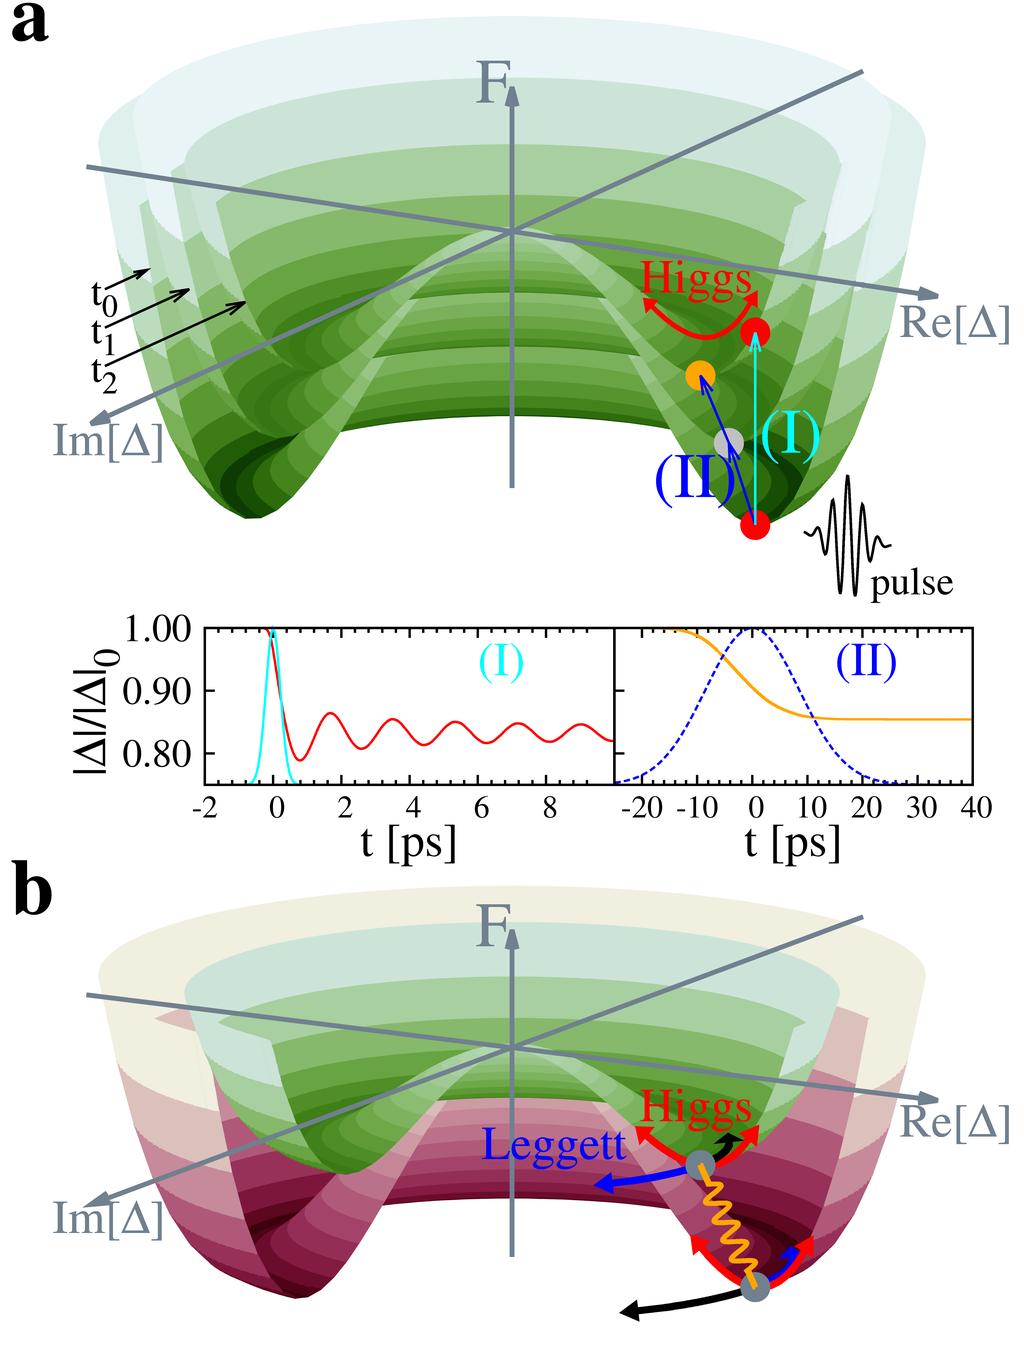 Coupling of Higgs and Leggett modes in nonequilibrium superconductors H. Krull,1, N. Bittner,, G. S. Uhrig,1, D. Manske,, and A. P. Schnyder, 1 arxiv:151.811v1 [cond-mat.